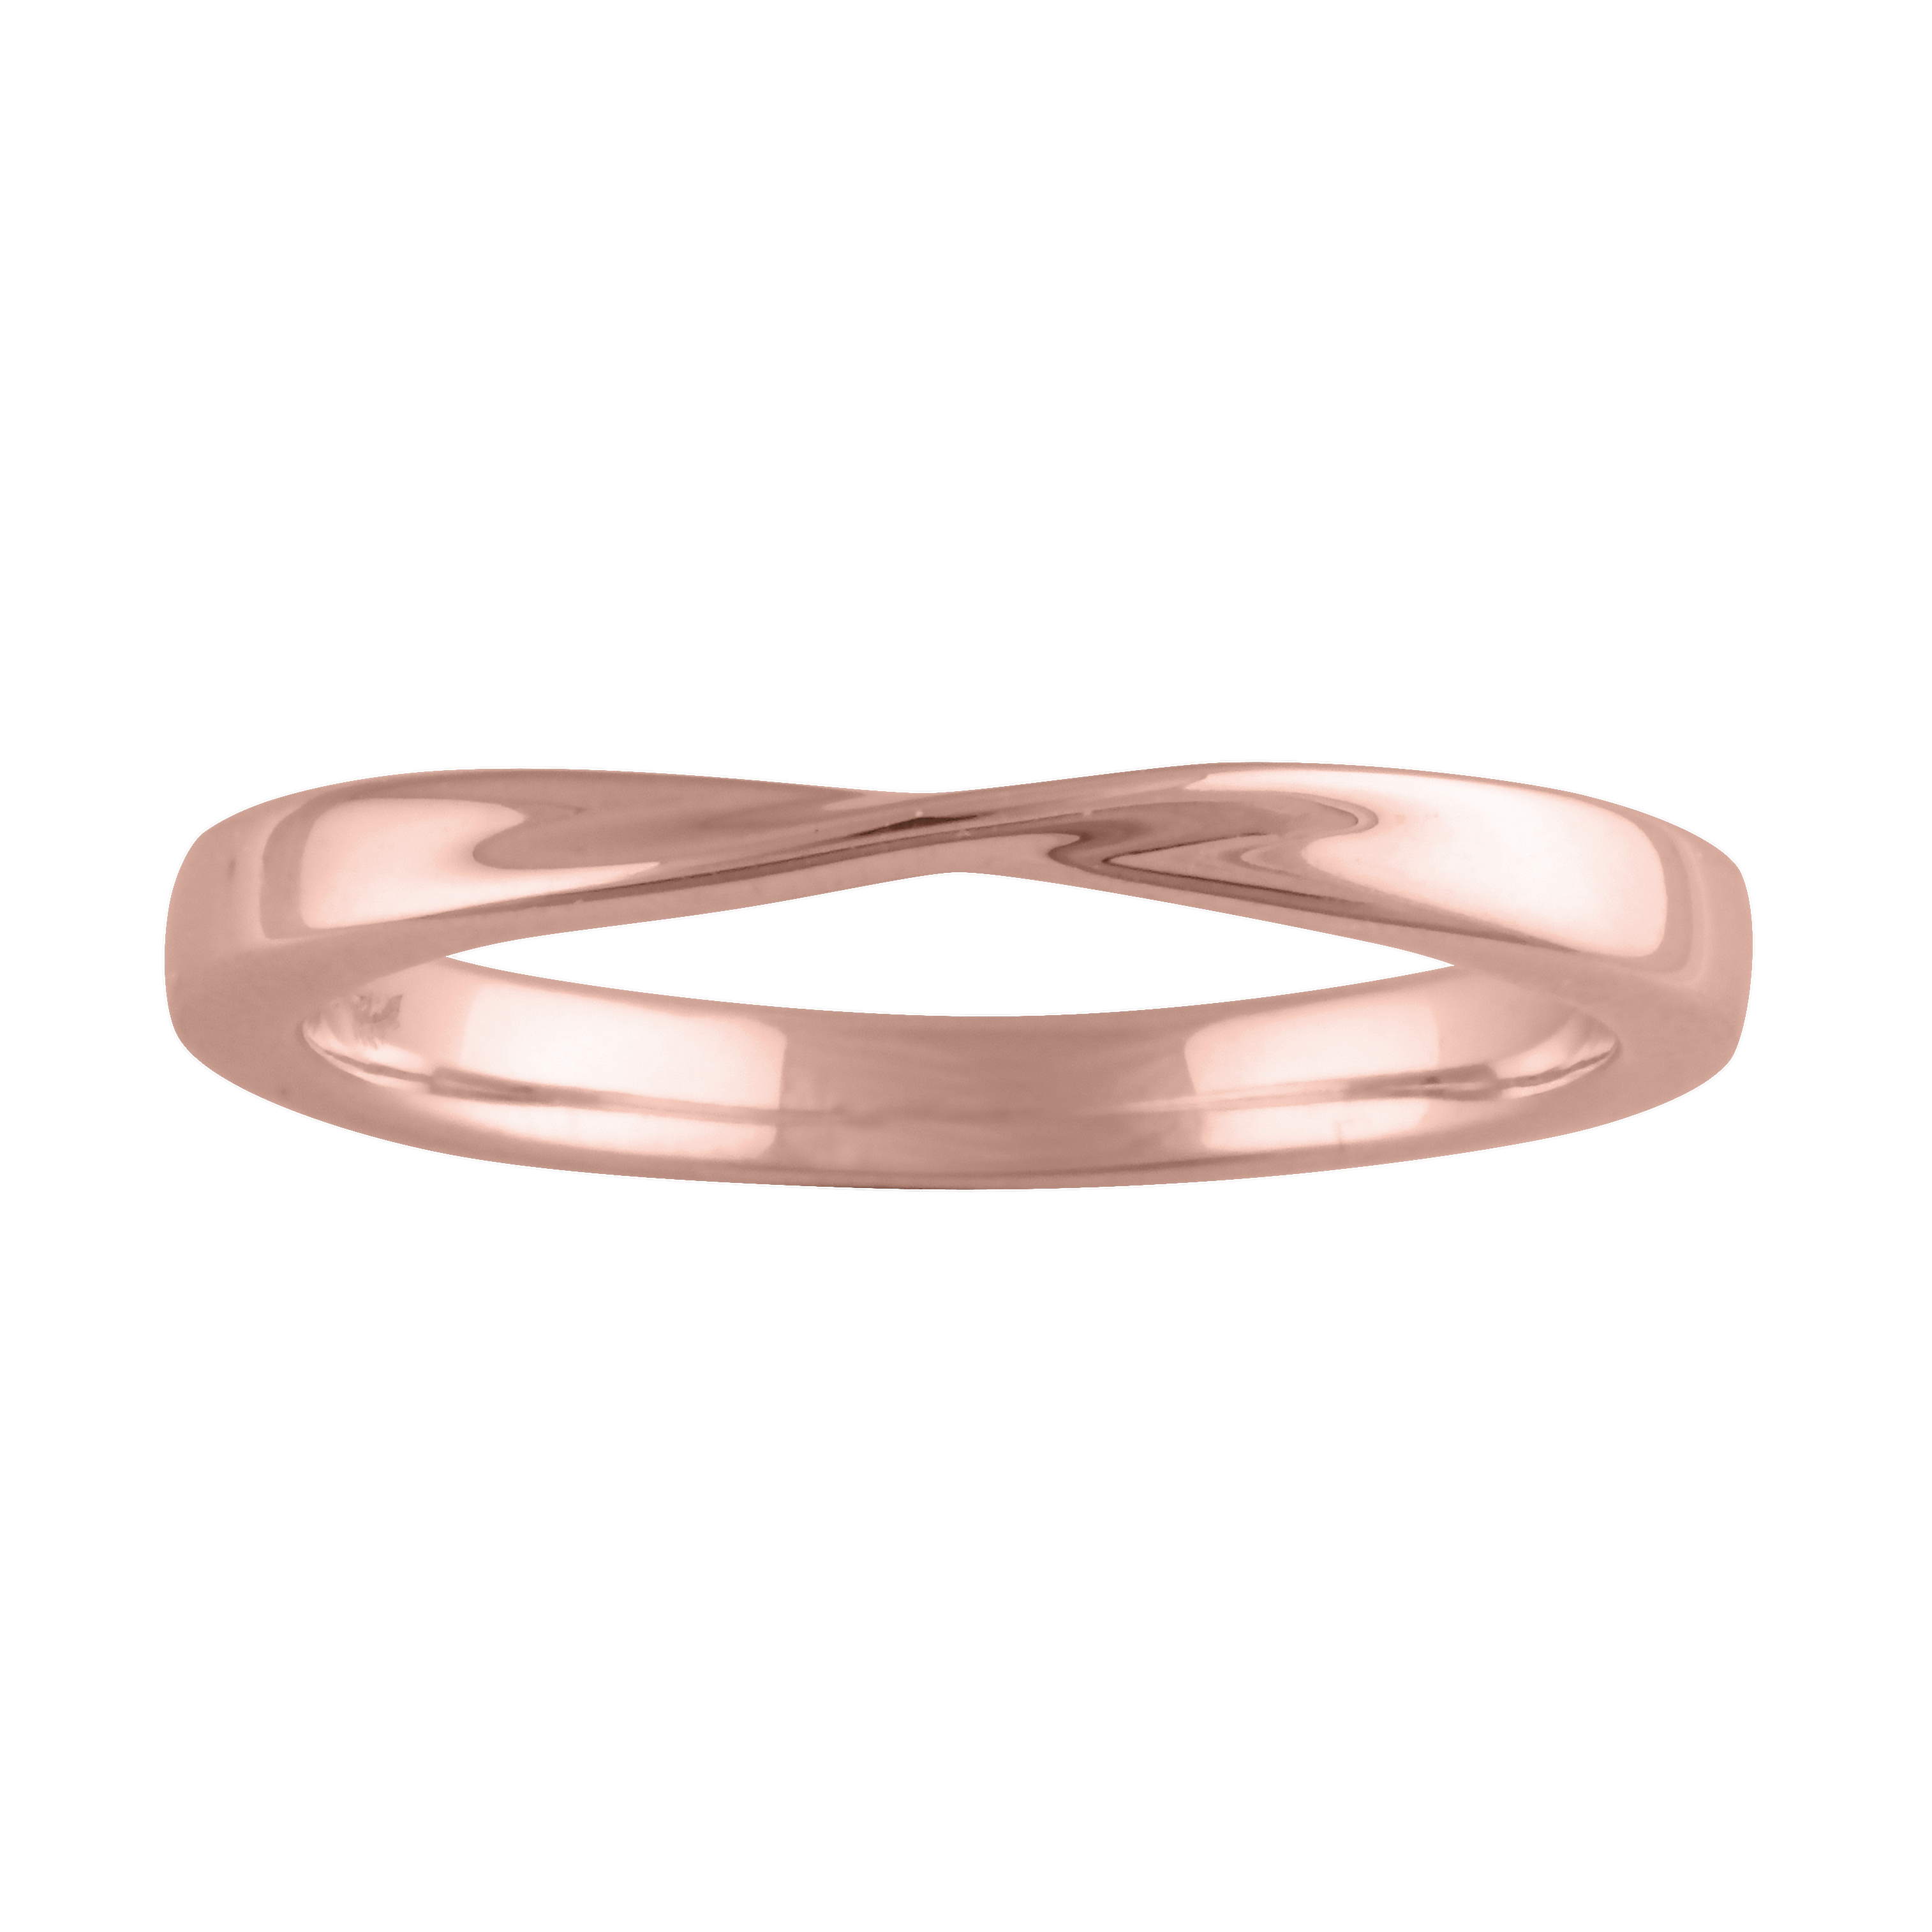 a detail photo of a simple rose gold twisted ring.